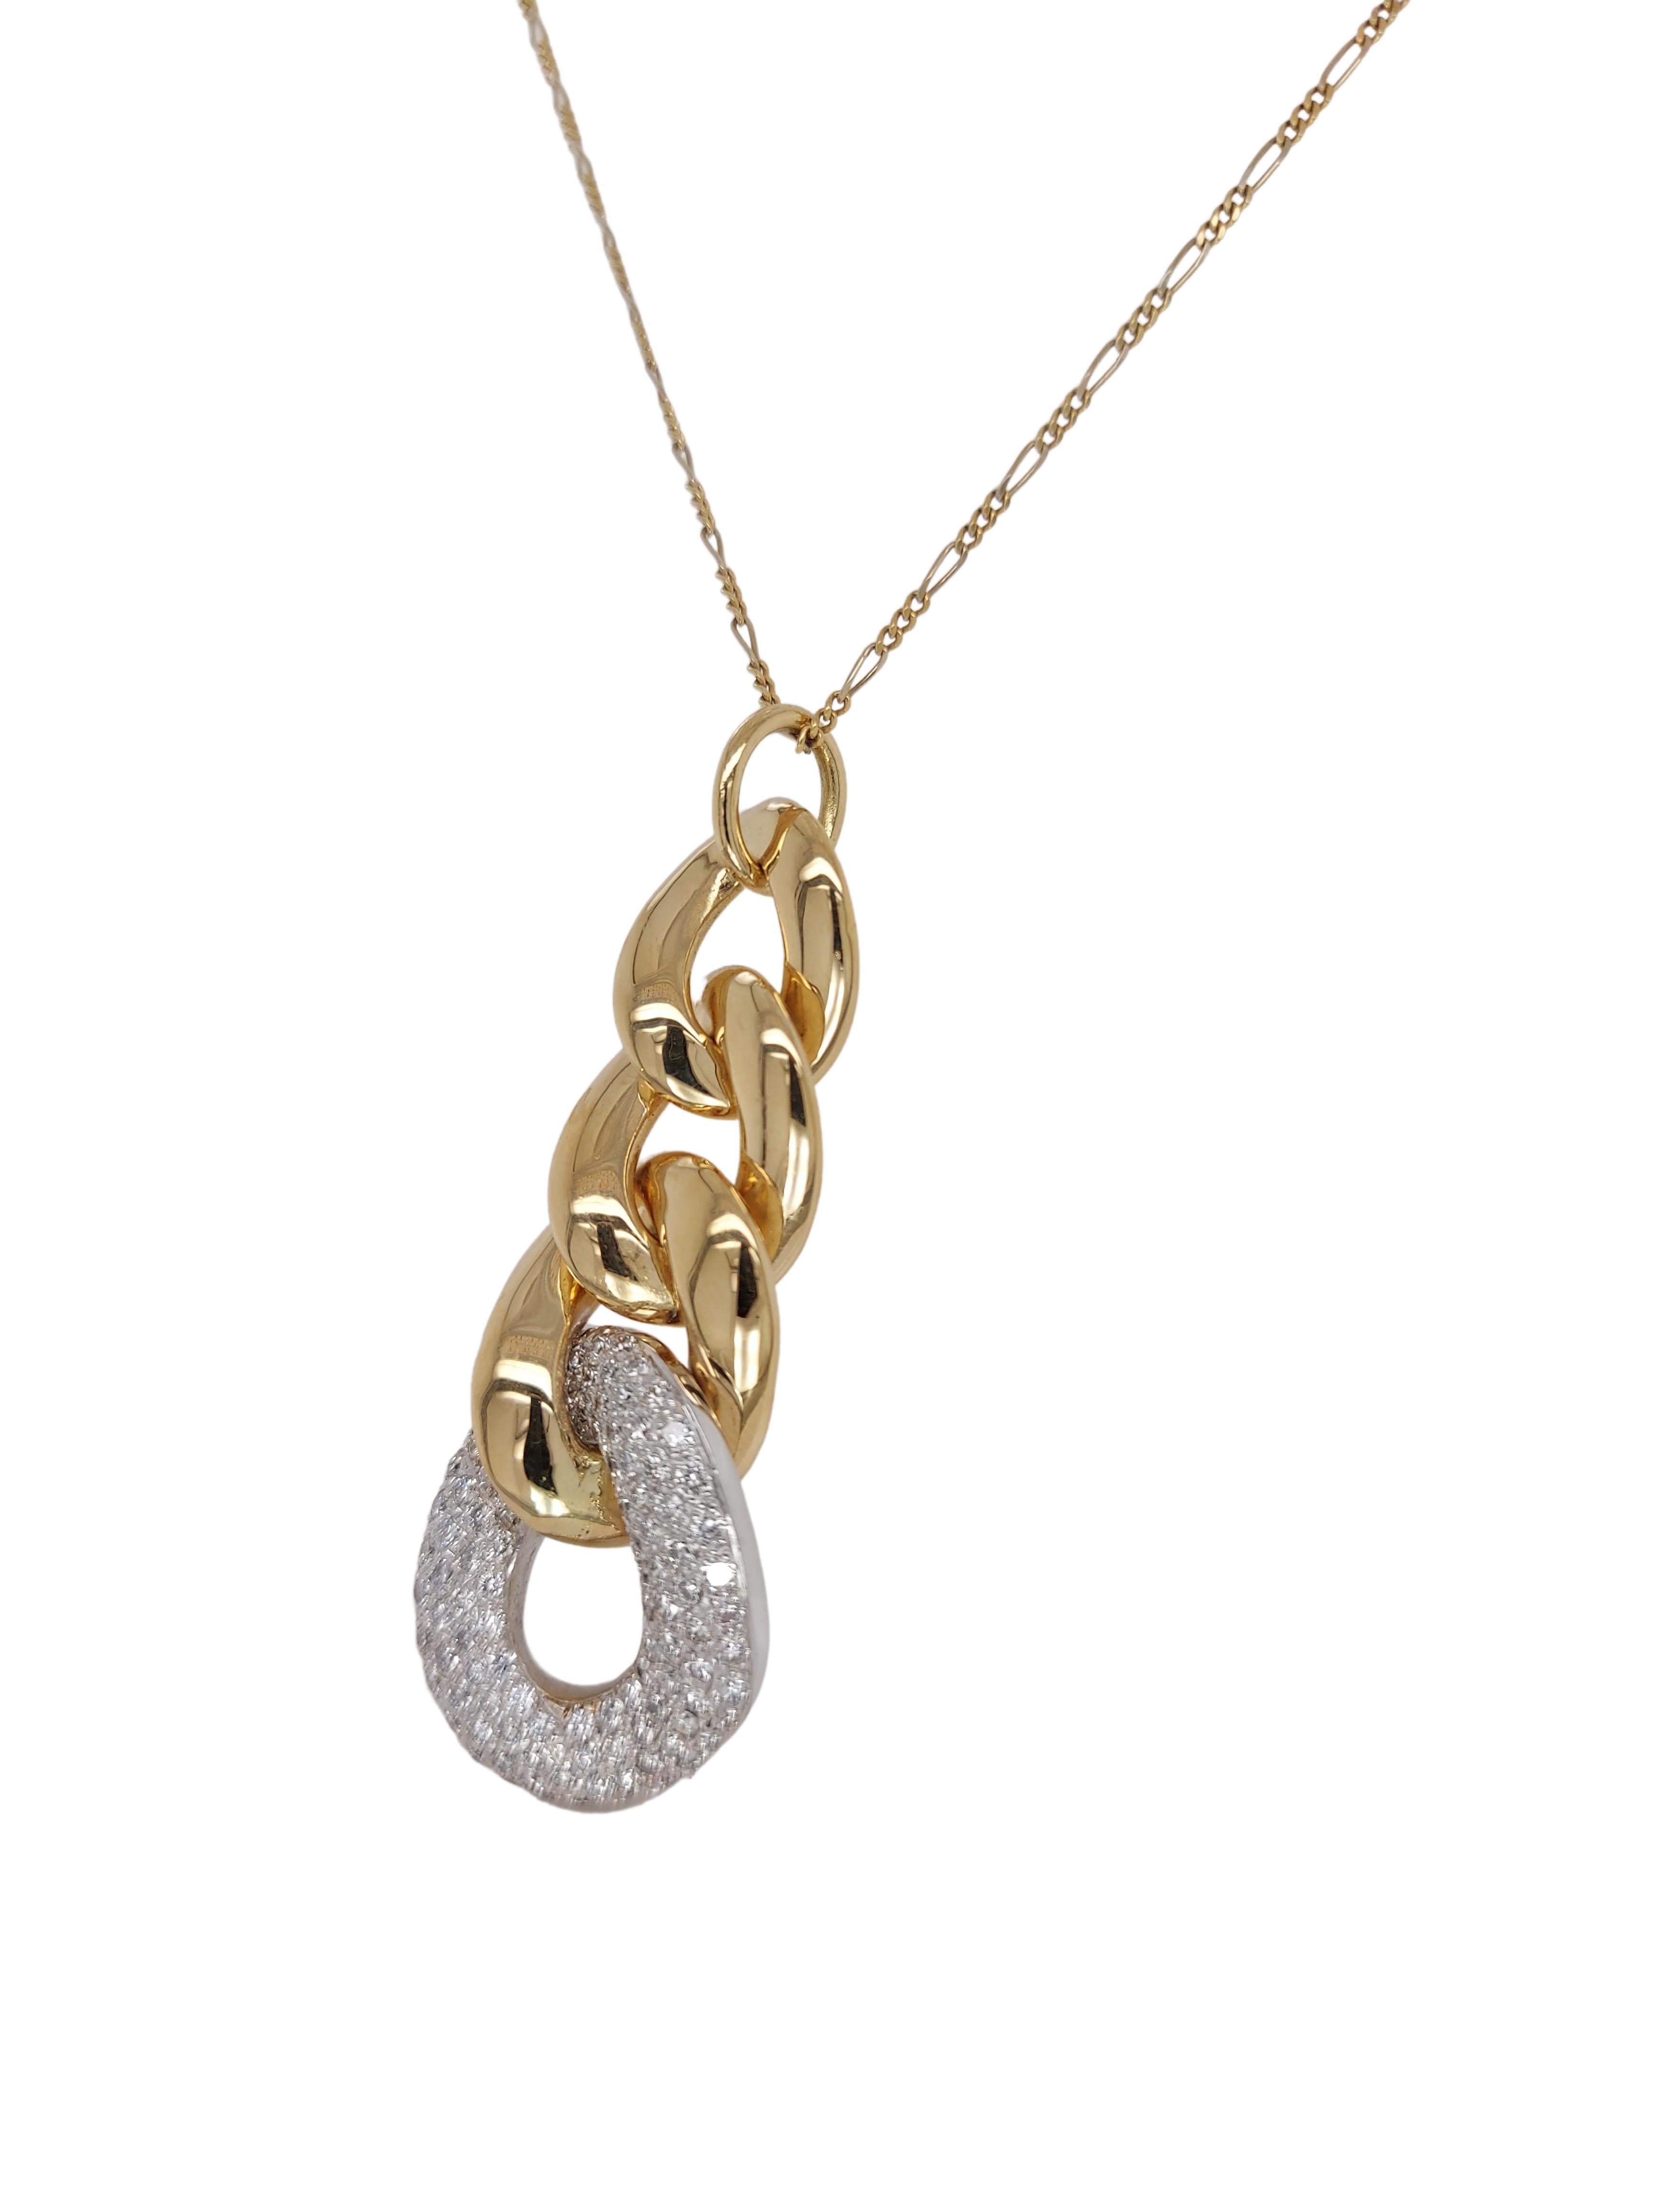 Brilliant Cut Stunning 18kt Yellow & White Gold Diamond Pendant/ Necklace with 2.6ct Diamonds For Sale